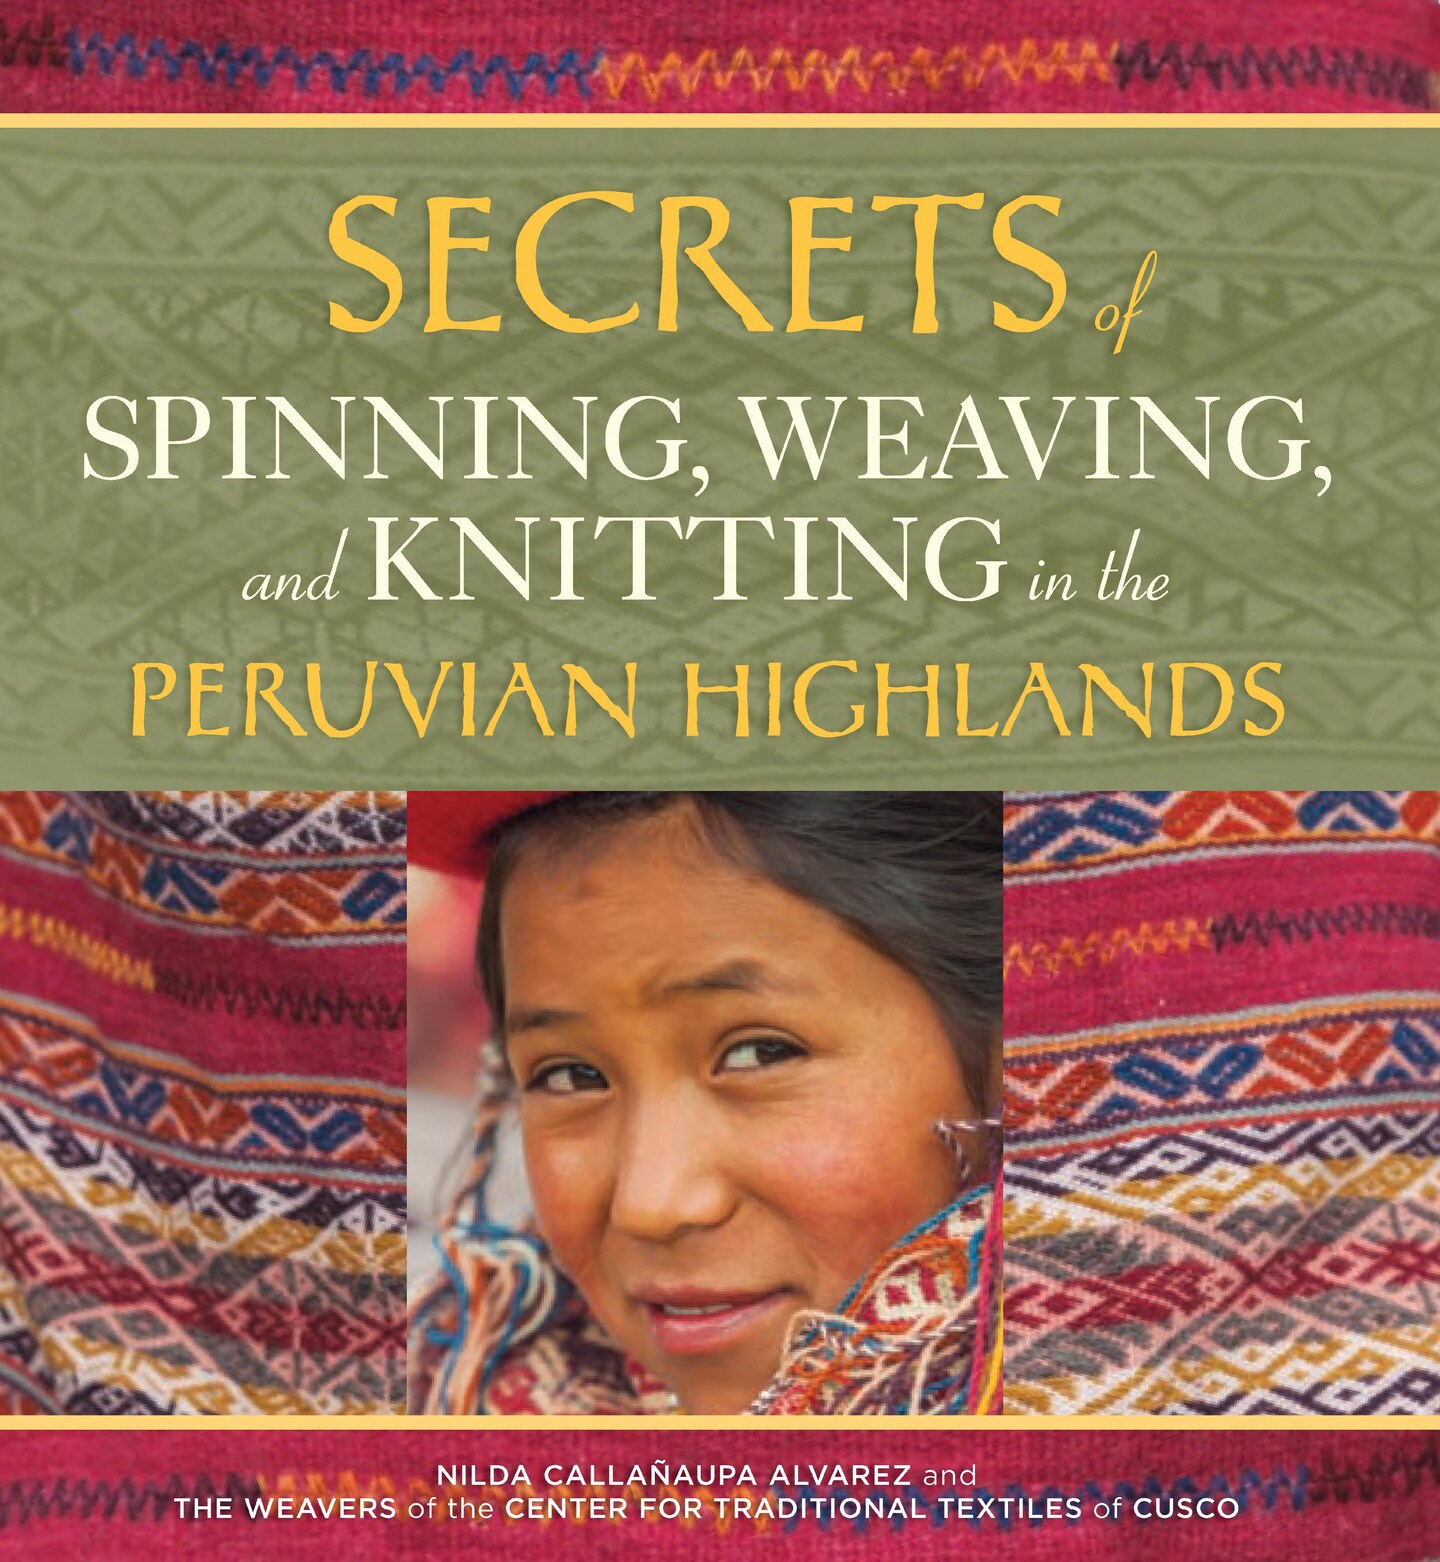 Secrets of Spinning, Weaving, and Knitting